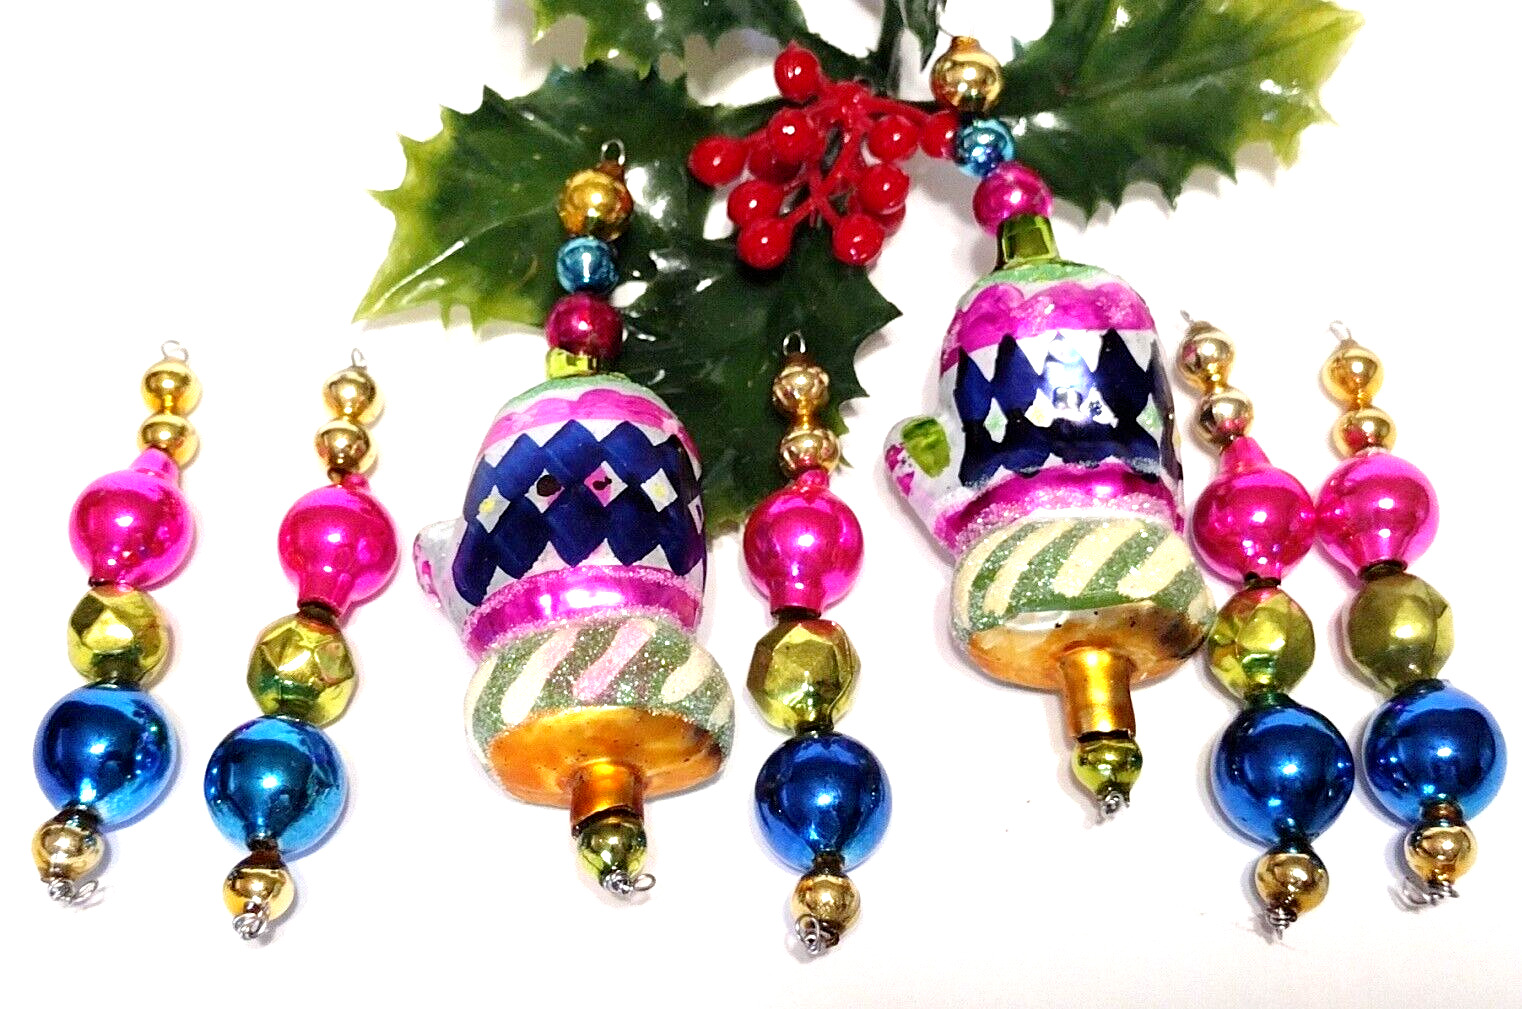 Mercury Glass Bead Icicles Christmas Ornaments 7 Pair MITTENS Faceted vtg #151